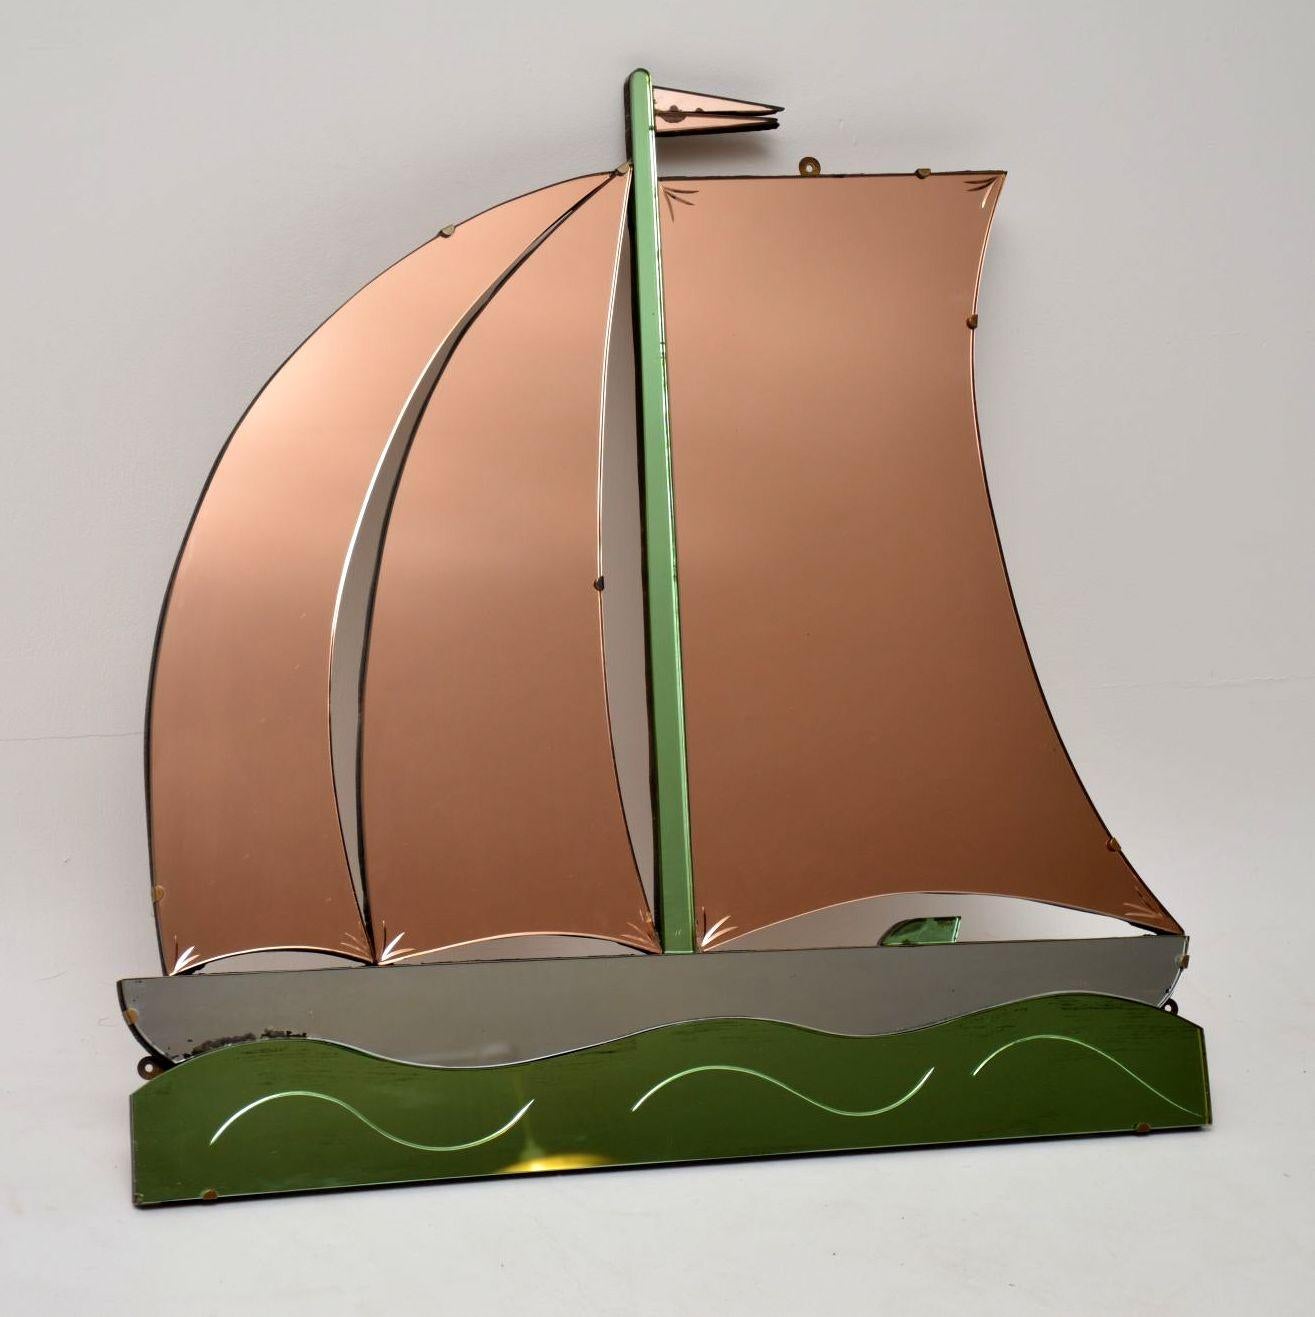 An absolutely stunning and very unusual vintage Art Deco period mirror in the shape of a boat, this dates from the 1920s-1930s. It's in excellent original condition, with just some incredibly minor wear to the silvered backing on one or two edges.